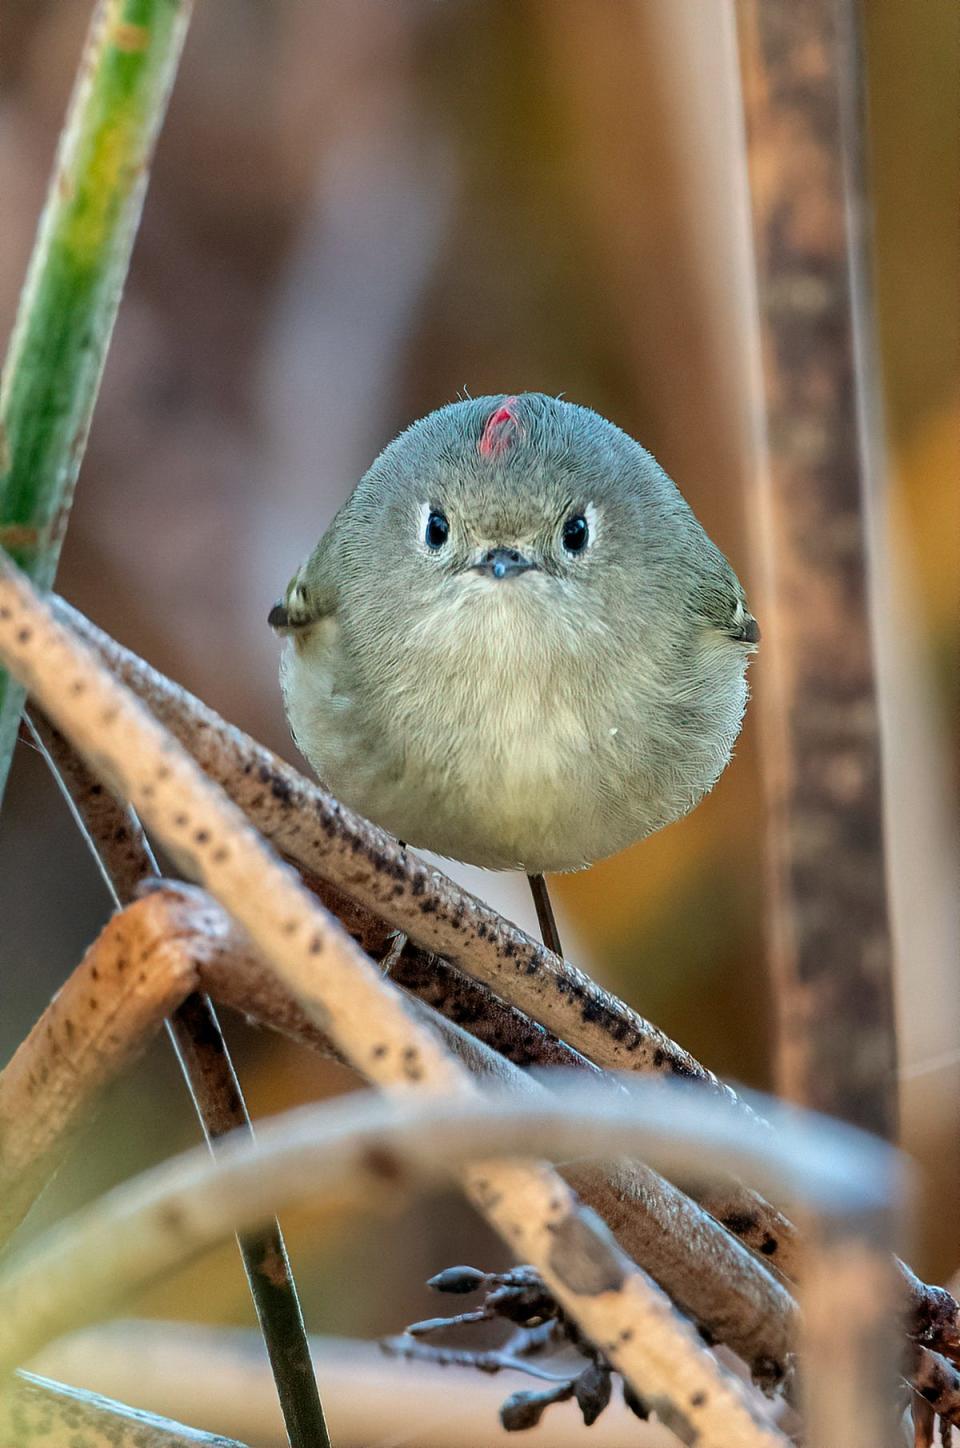 A puffed-up bird that appears to be angry.